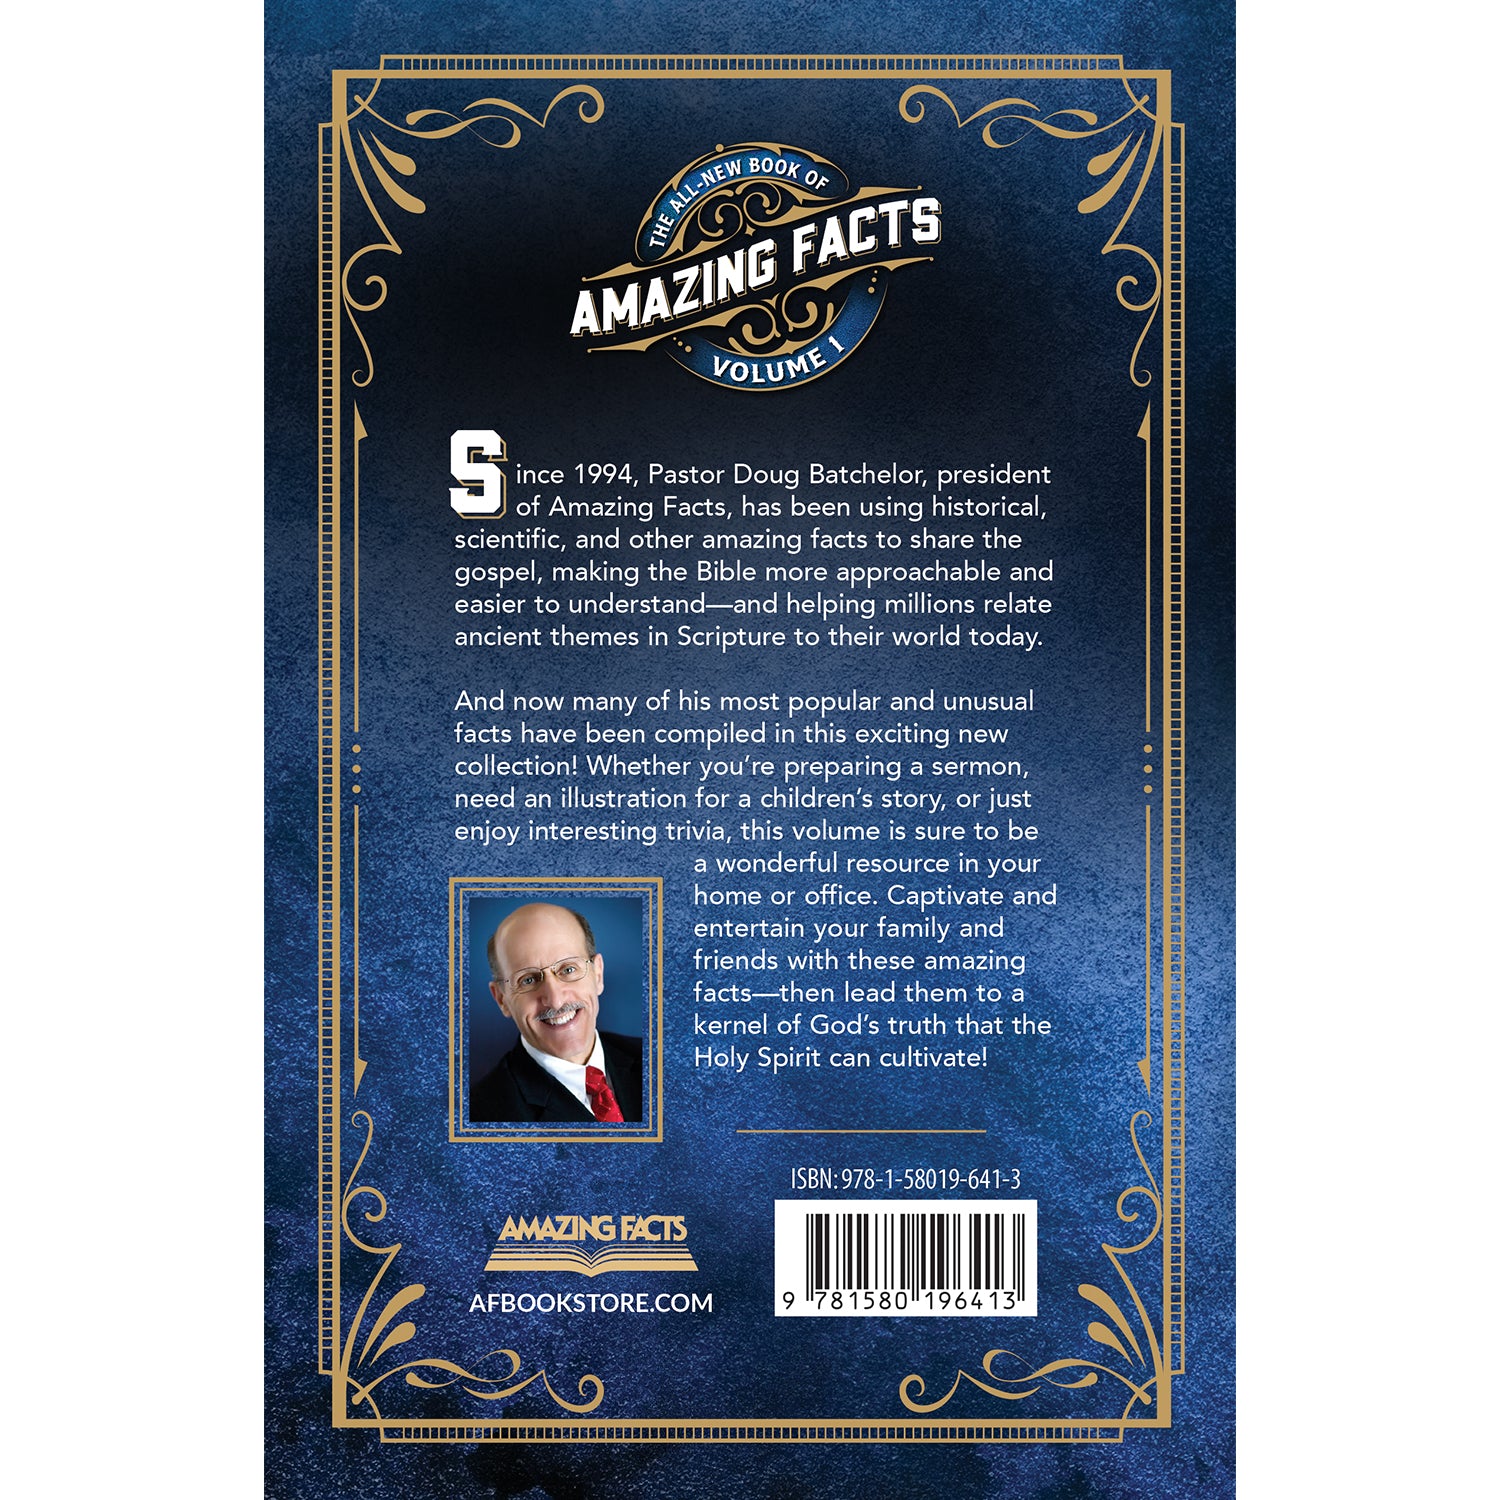 The All-New Book of Amazing Facts Vol 1 by Doug Batchelor